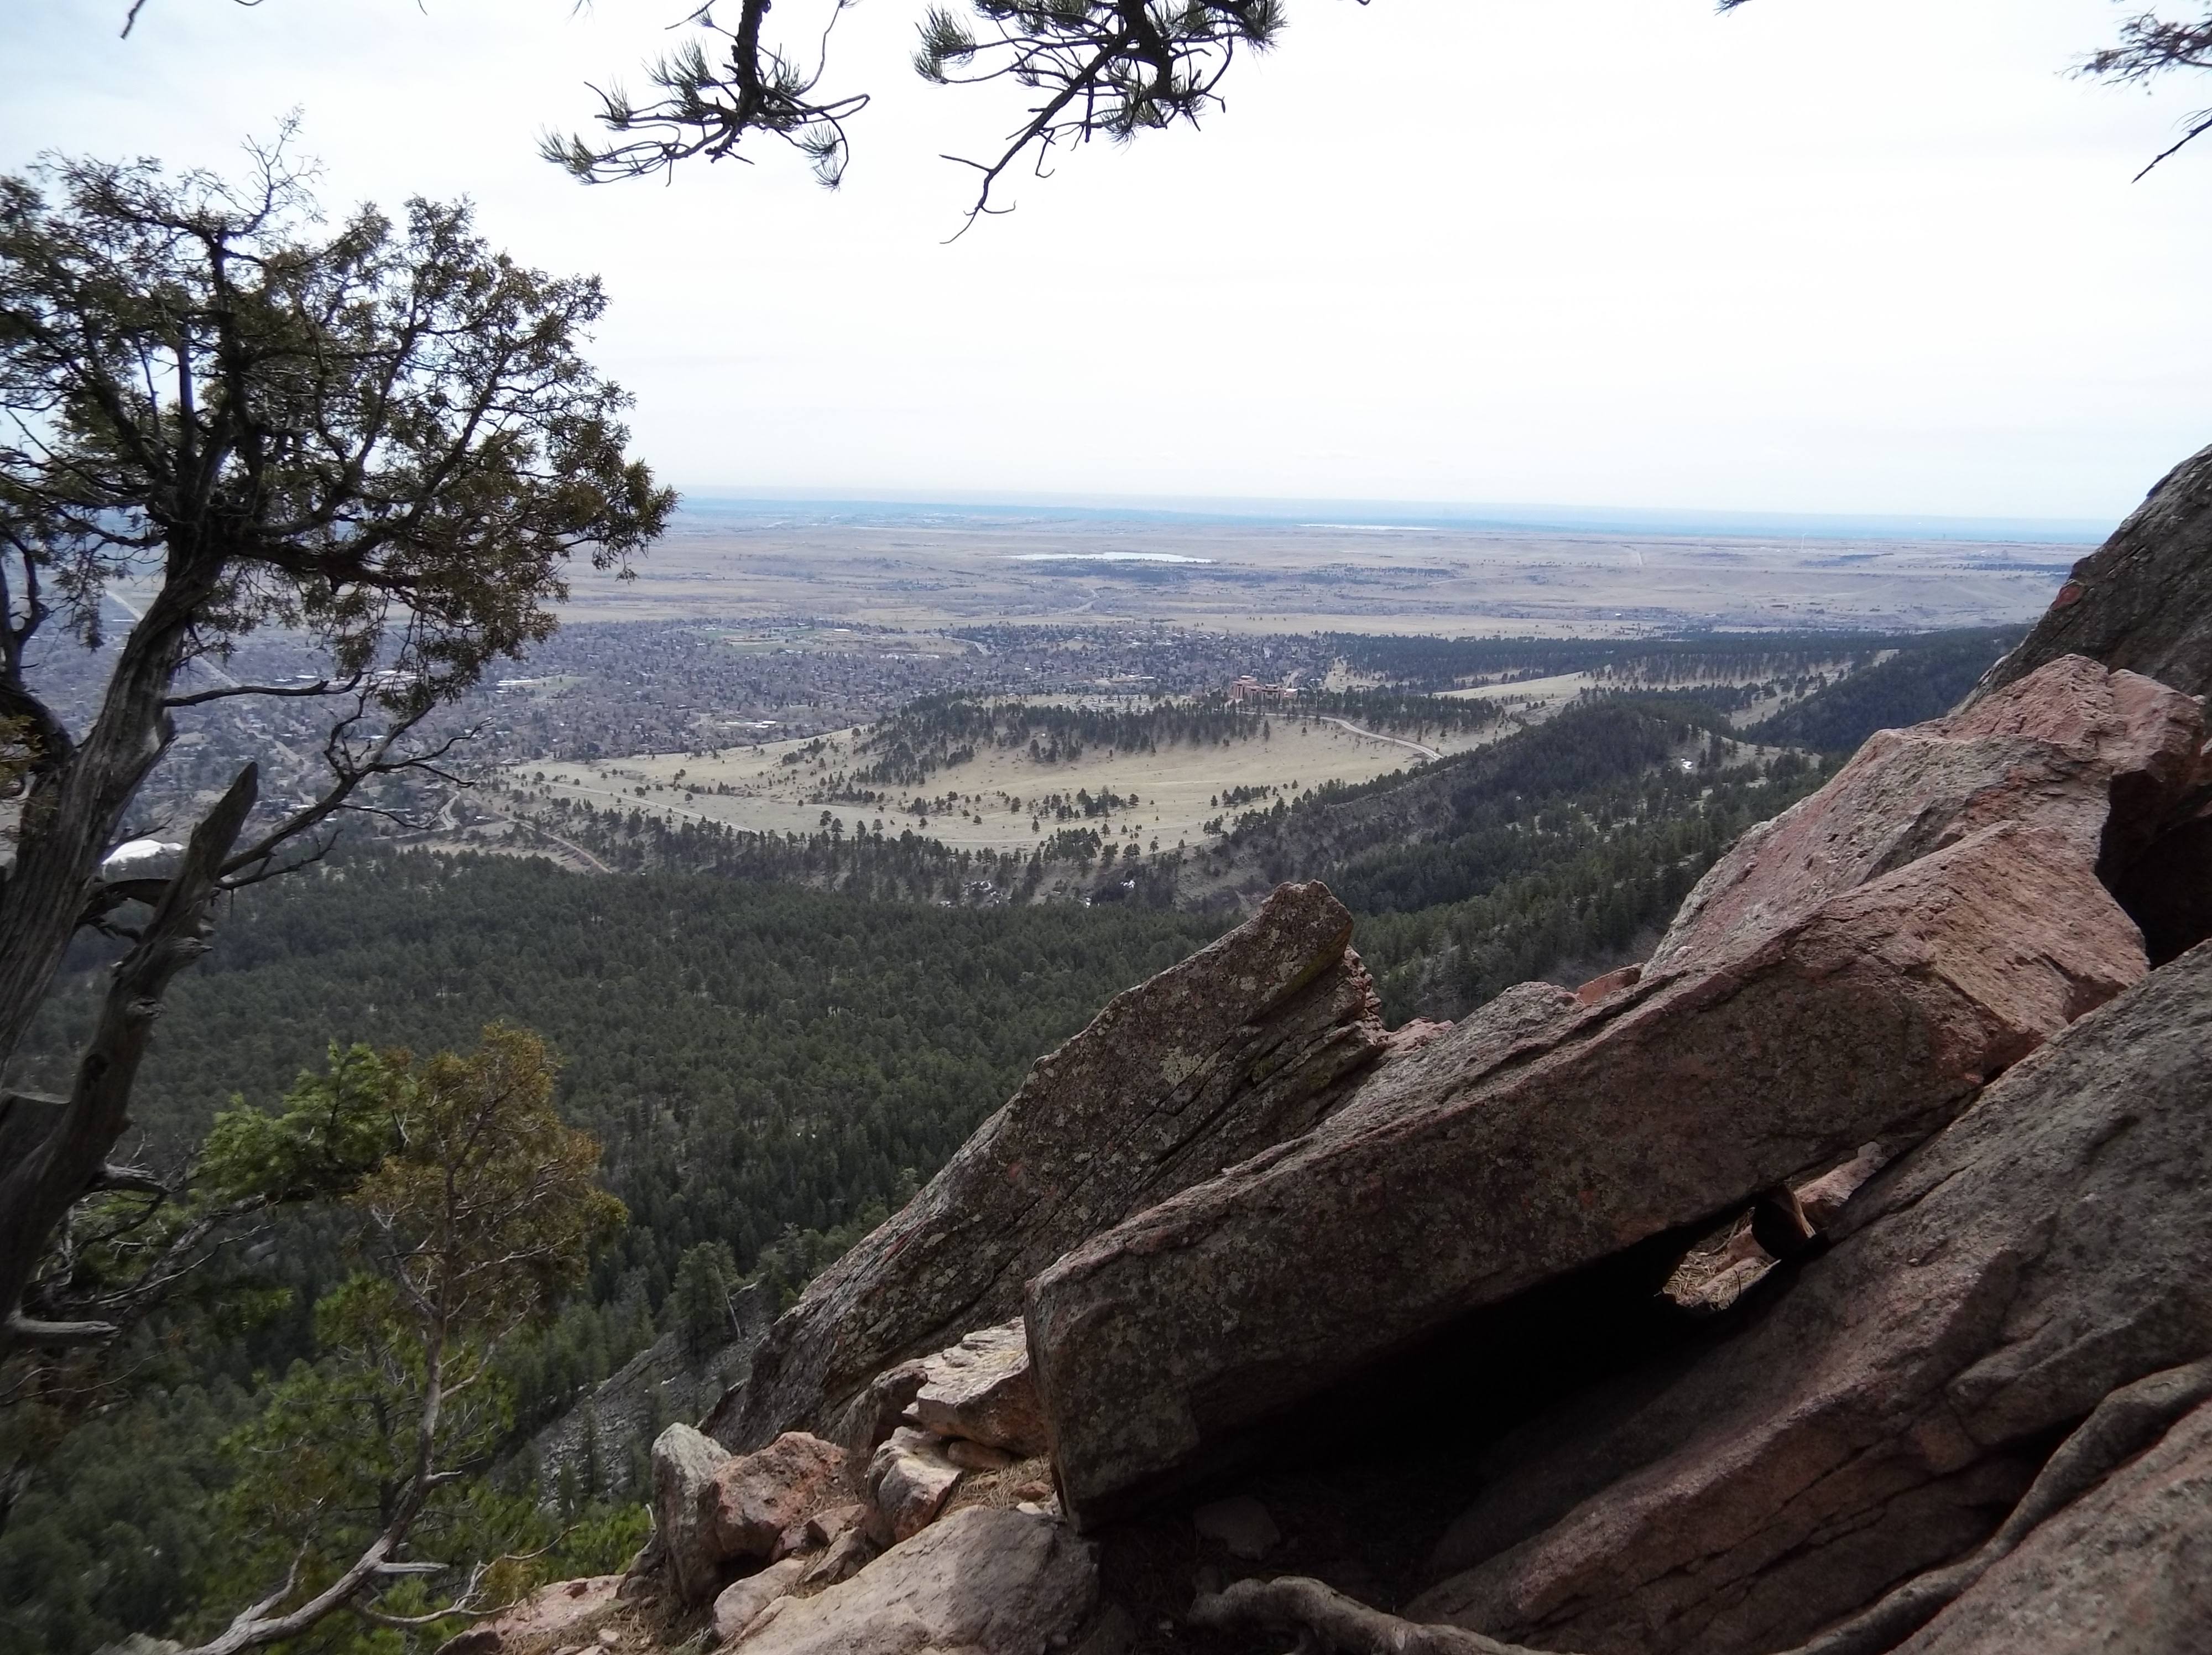 Looking down on Boulder from Flatirons 1 and 2.